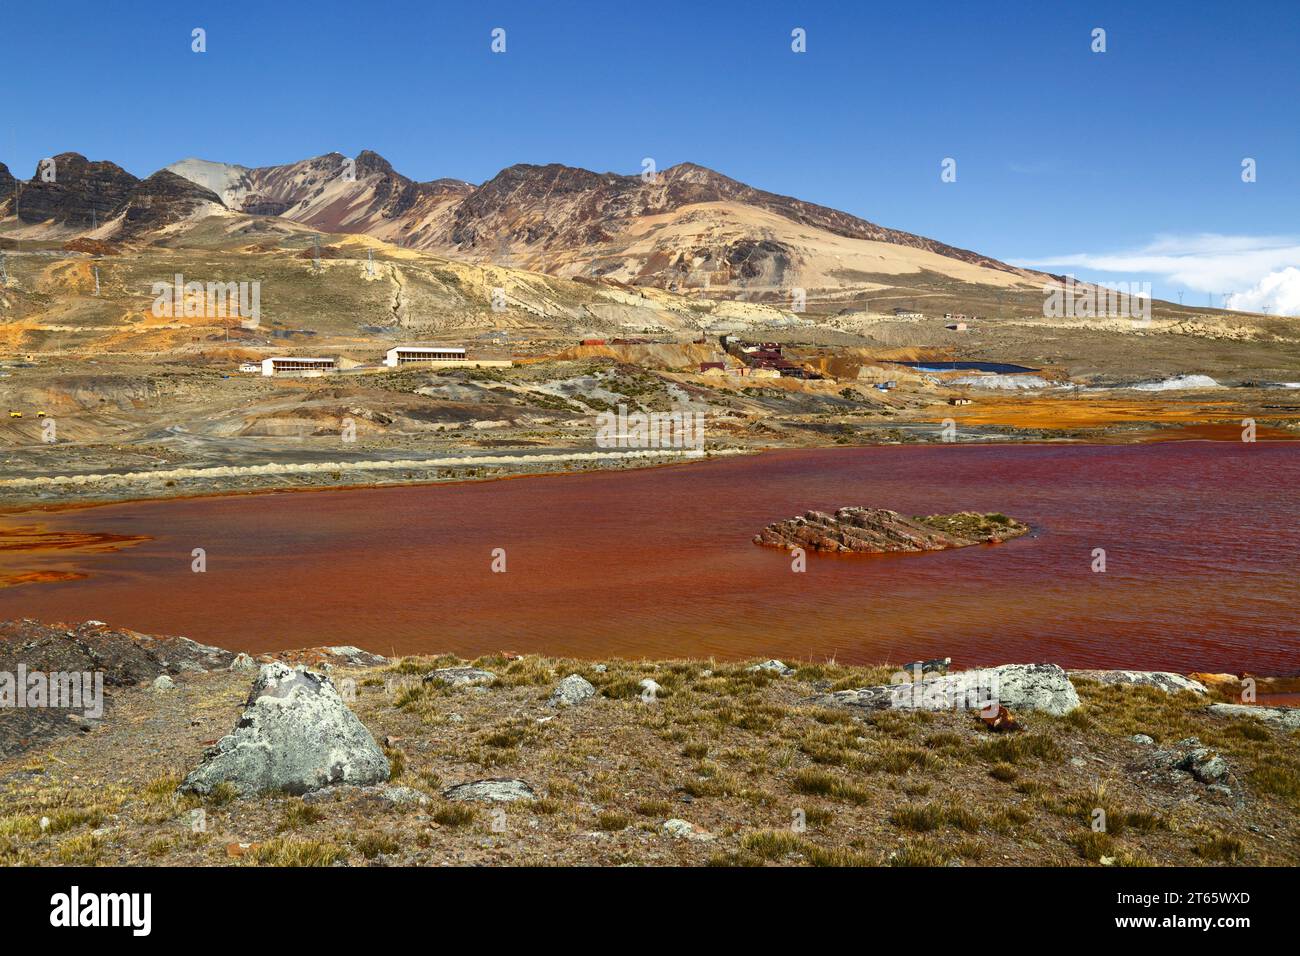 View across lake contaminated by acid mine drainage and industrial waste from the nearby tin mine at Milluni (part of which can be seen on the far bank and mountainside), near La Paz, Bolivia. The mountains are the foothills of the Mt Chacaltaya massif. Stock Photo